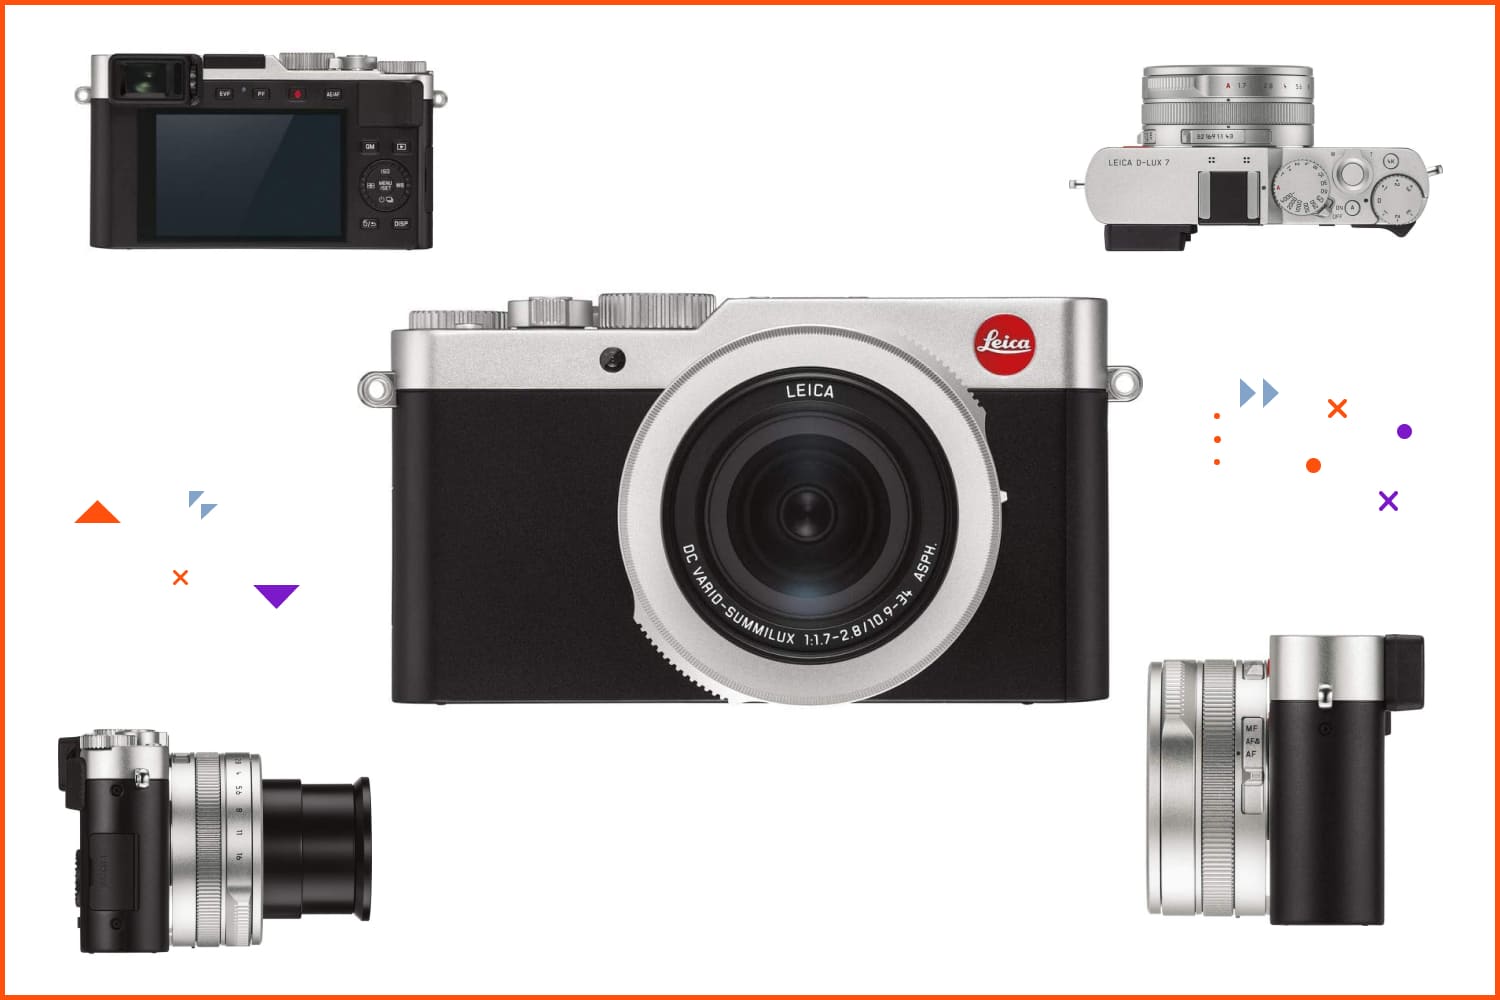 Leica D-LUX 7 4K Compact Camera.